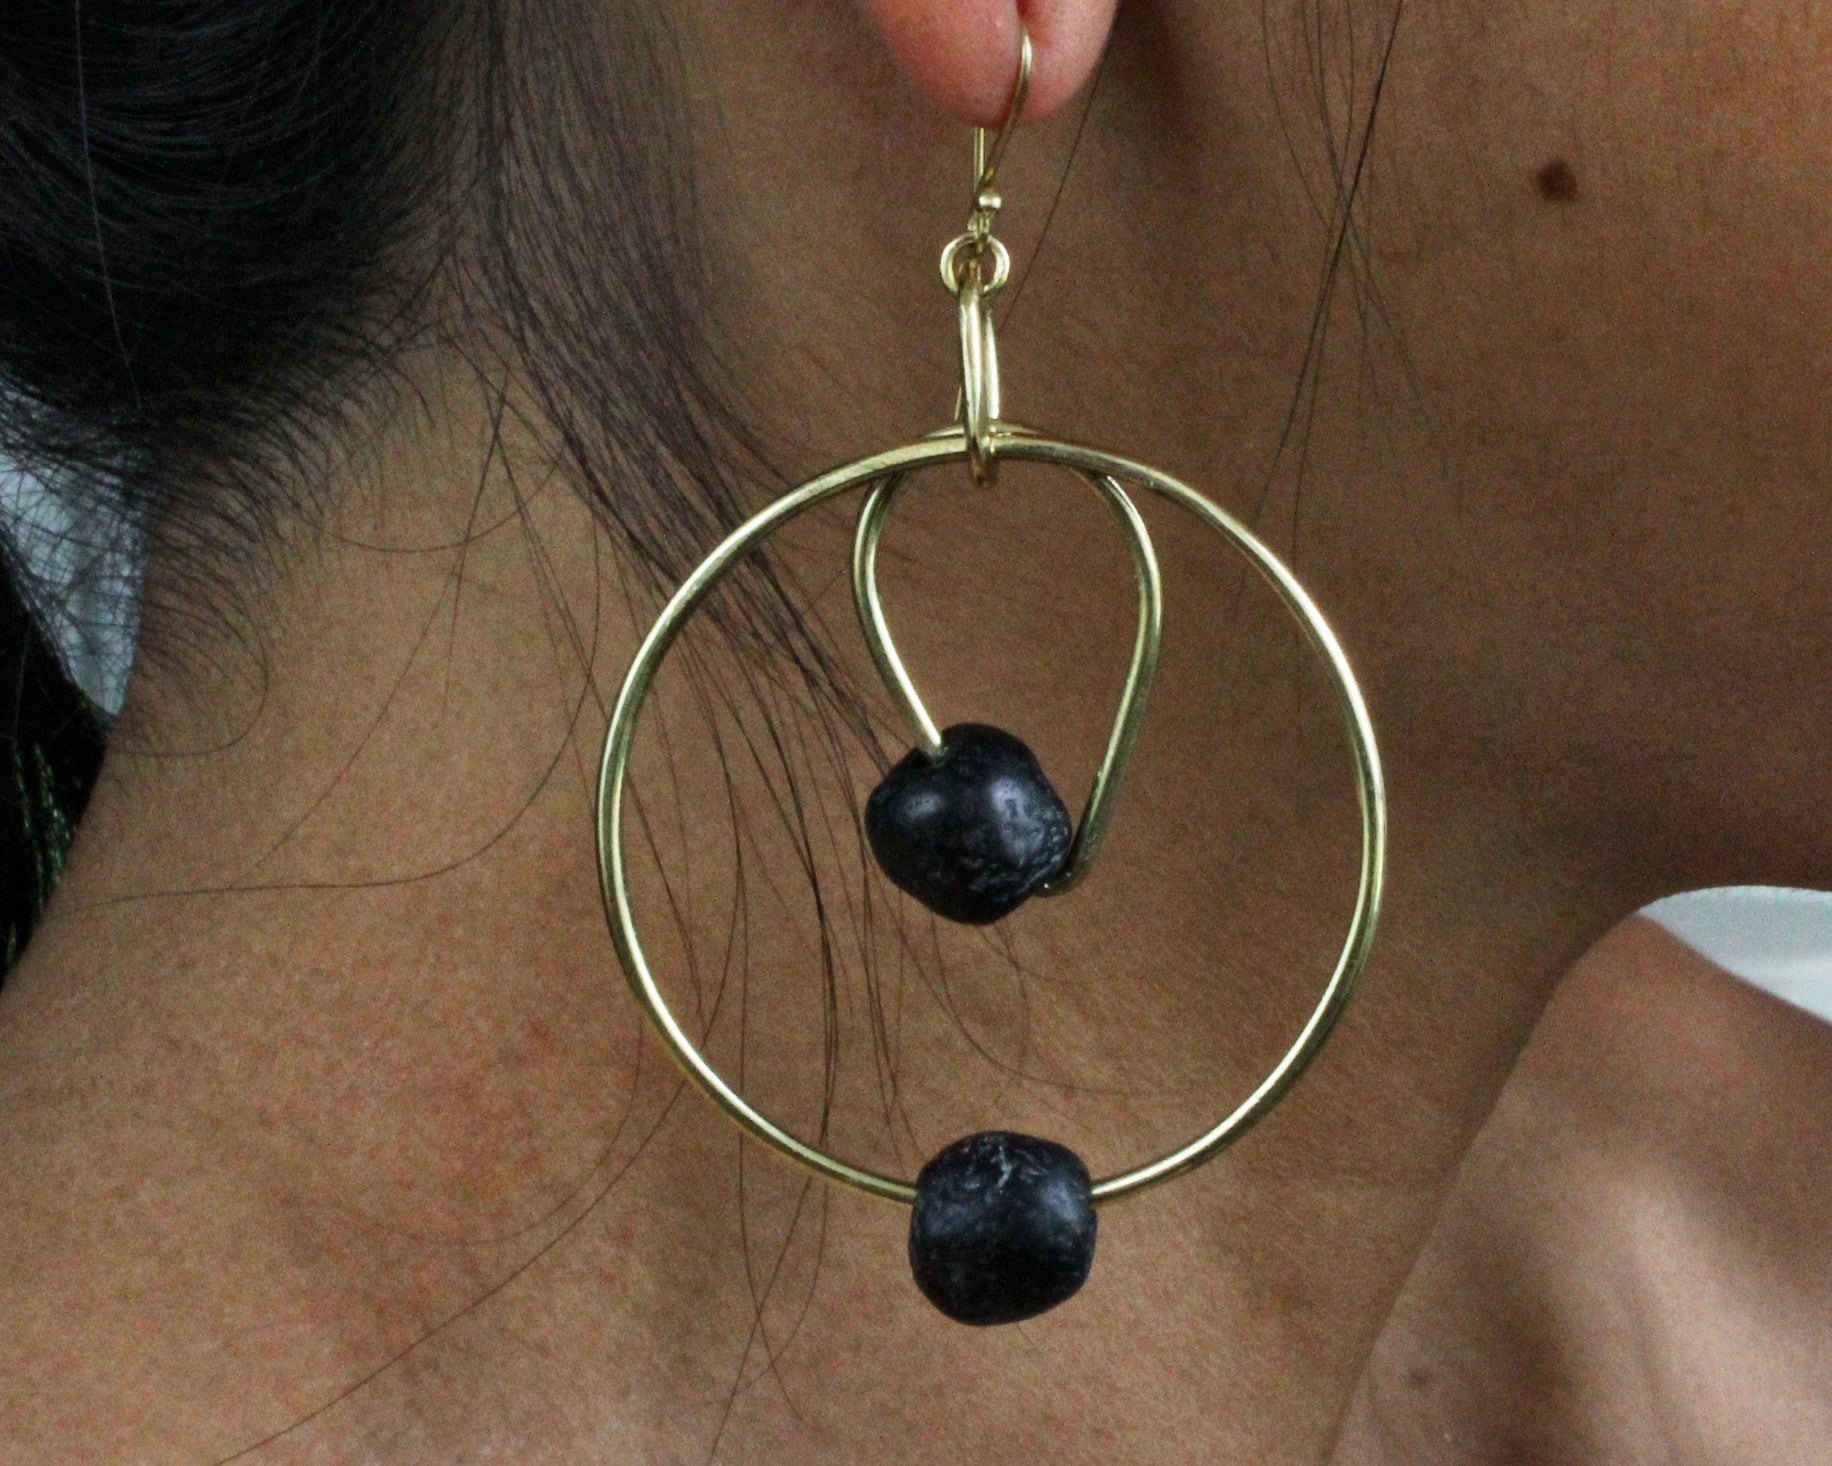 Handmade earrings, brass and black stone, recycled, upcycled, African